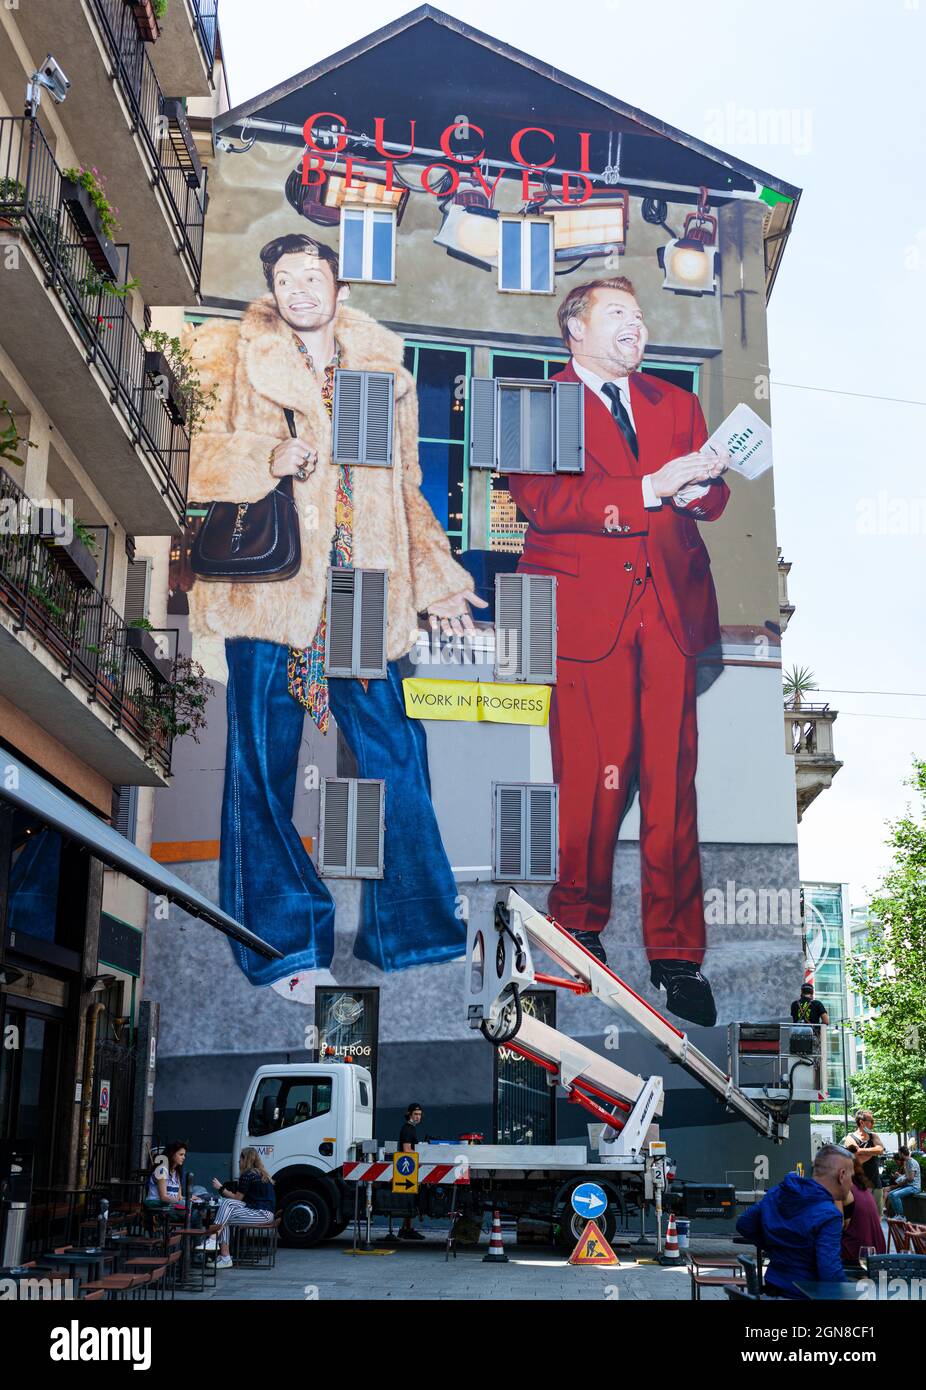 Milan, Italy - June 30: View of the Belowed show; the murales of Harry and James Corden by Harmony Korine at Gucci Wall of Milan on June 30, 2021 Stock Photo